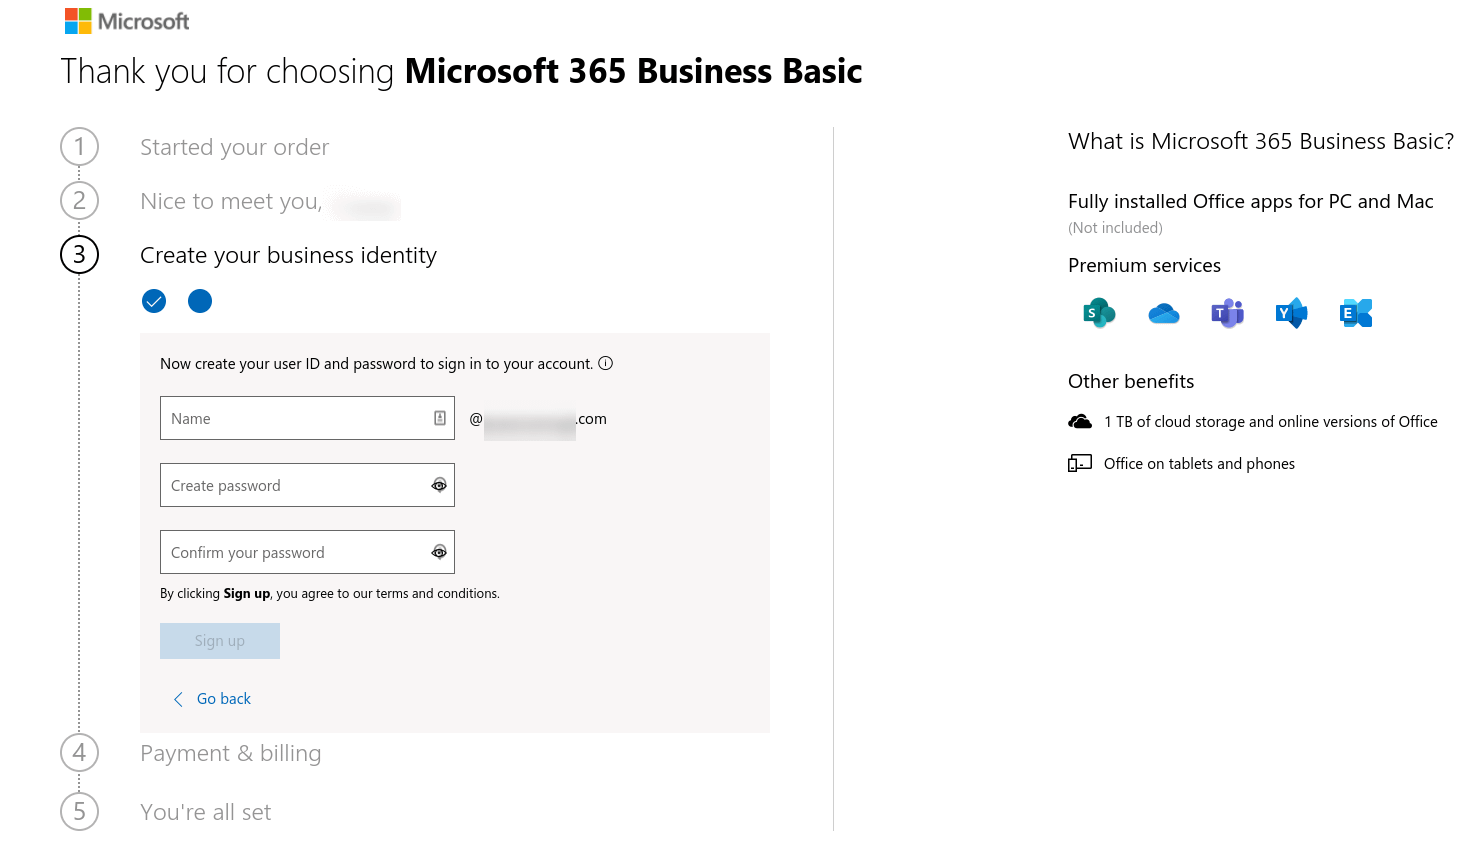 The form to create a user ID and password for Microsoft 365.